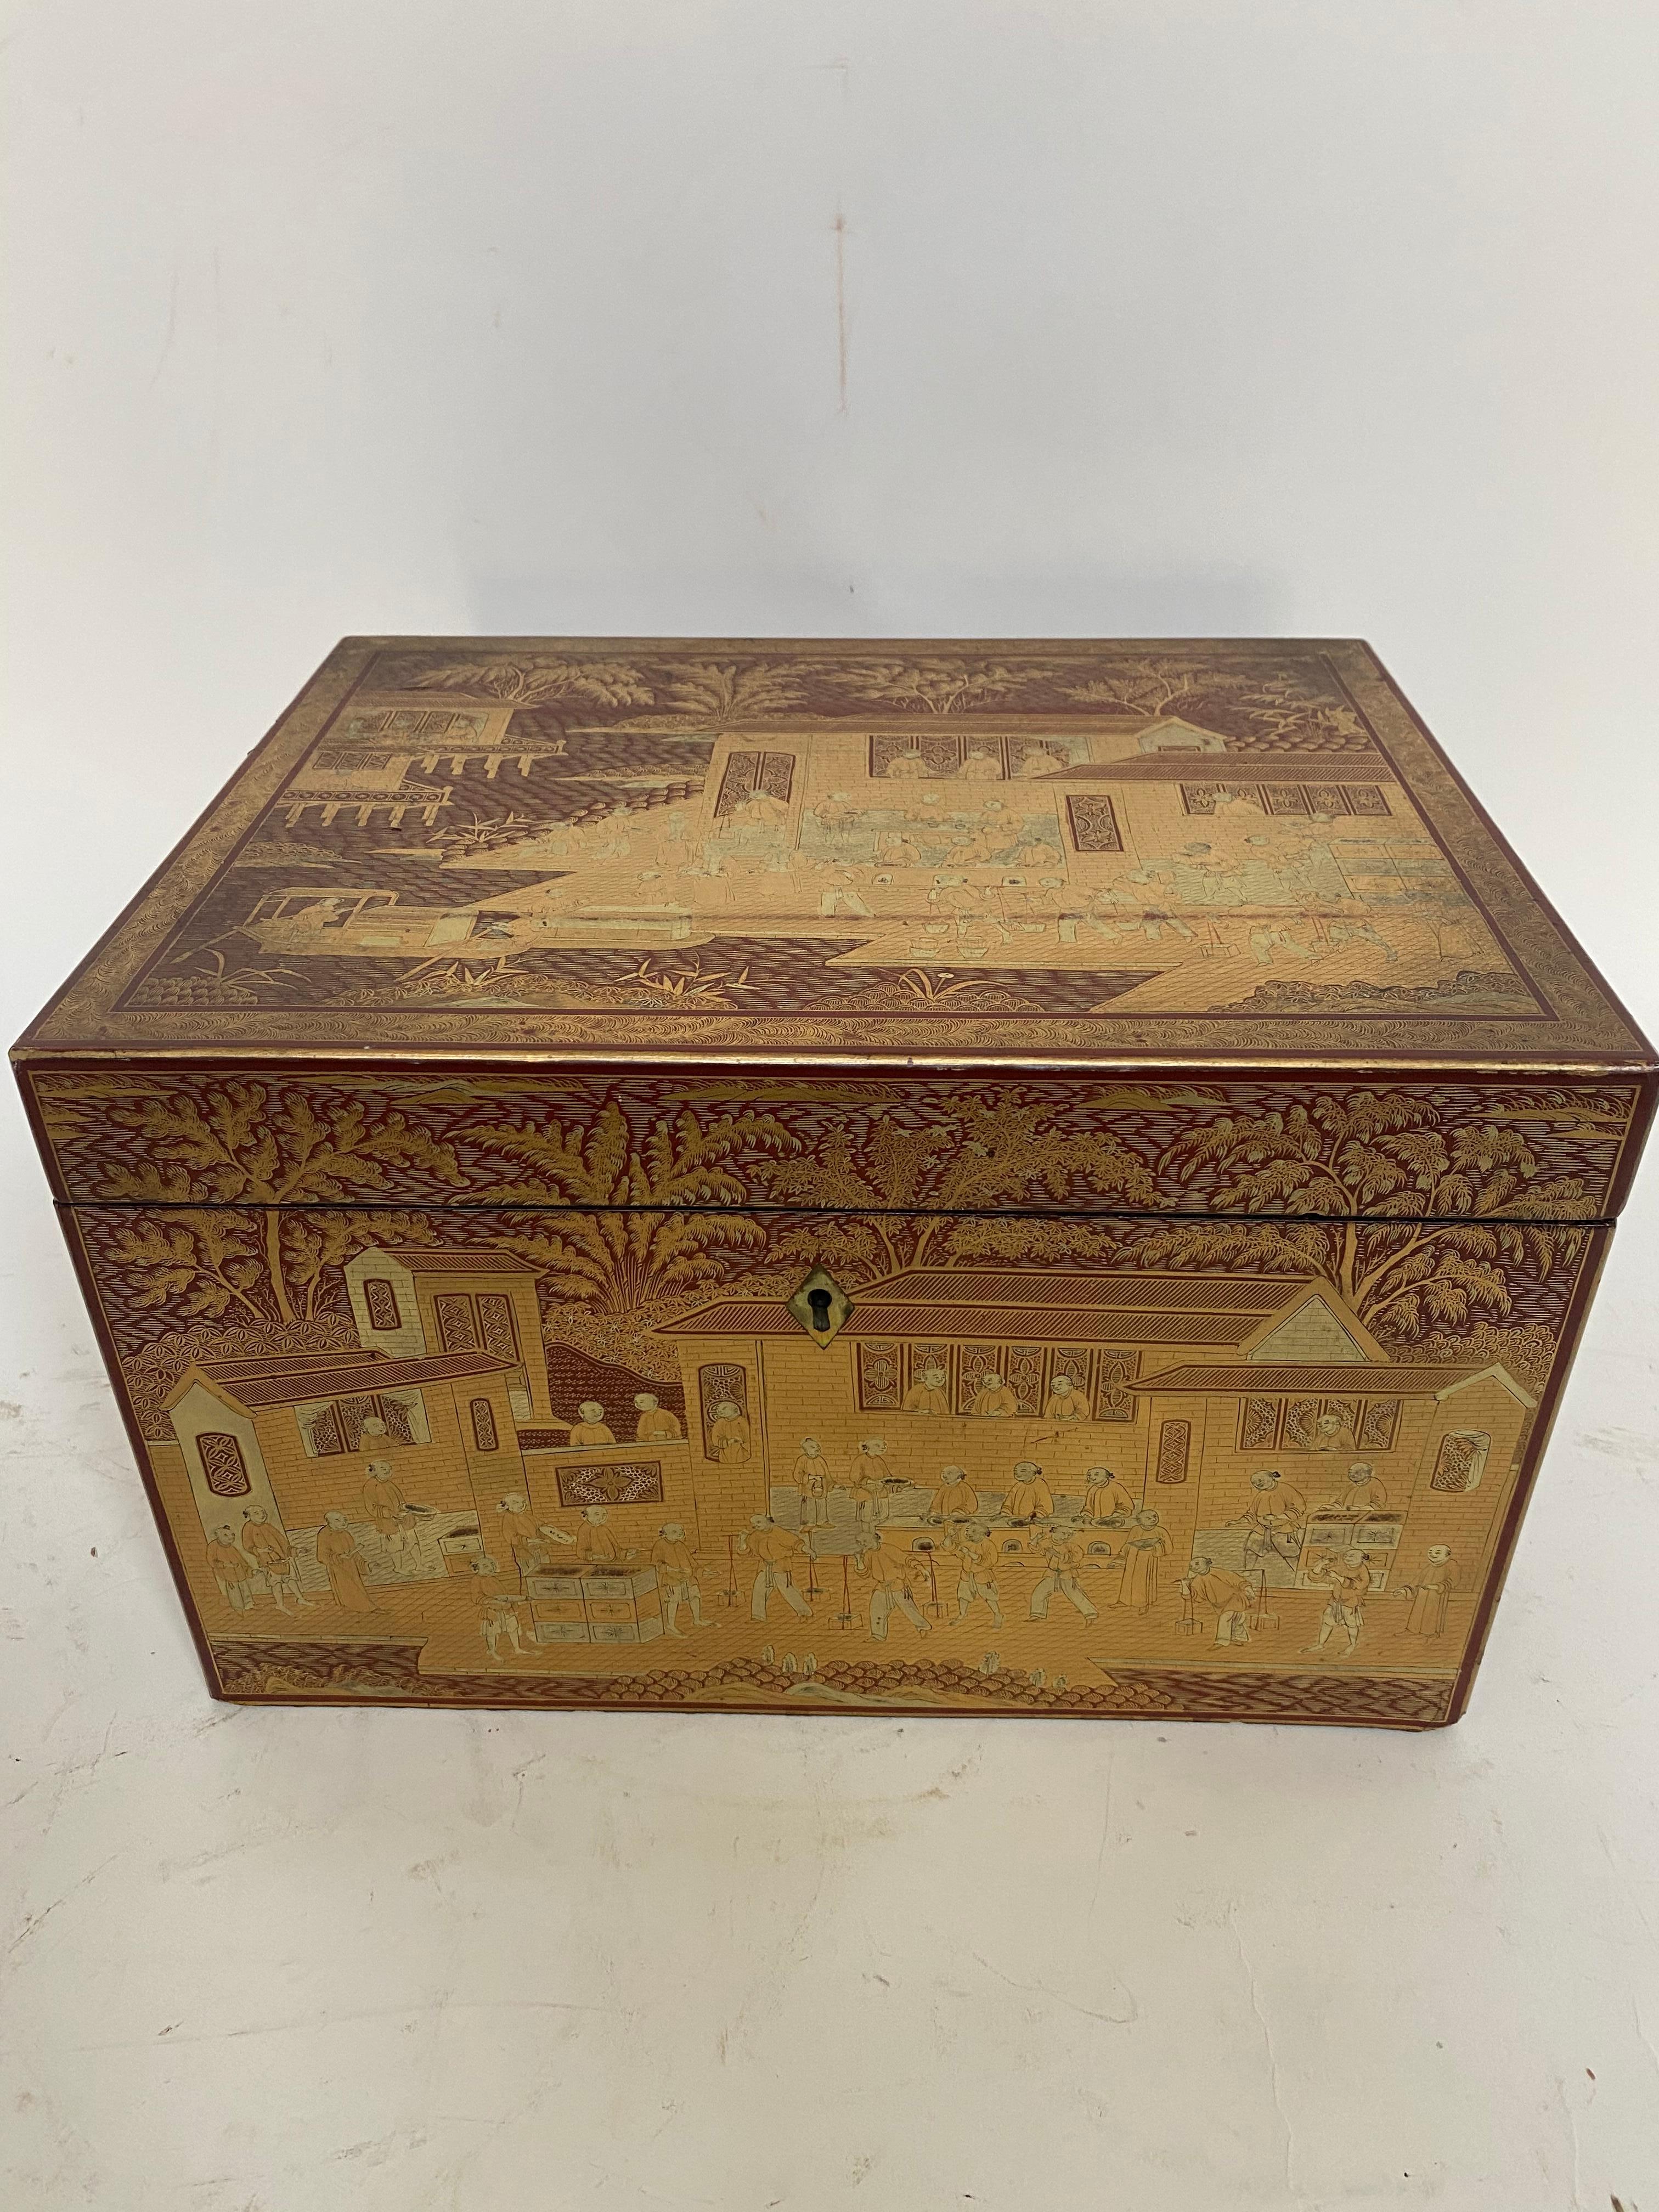 19th century golden black lacquer Chinese tea caddy with big pewter and a key, the rectangular-section body decorated with panels of landscapes, a very beautiful piece. See more pictures, measures: 8.25